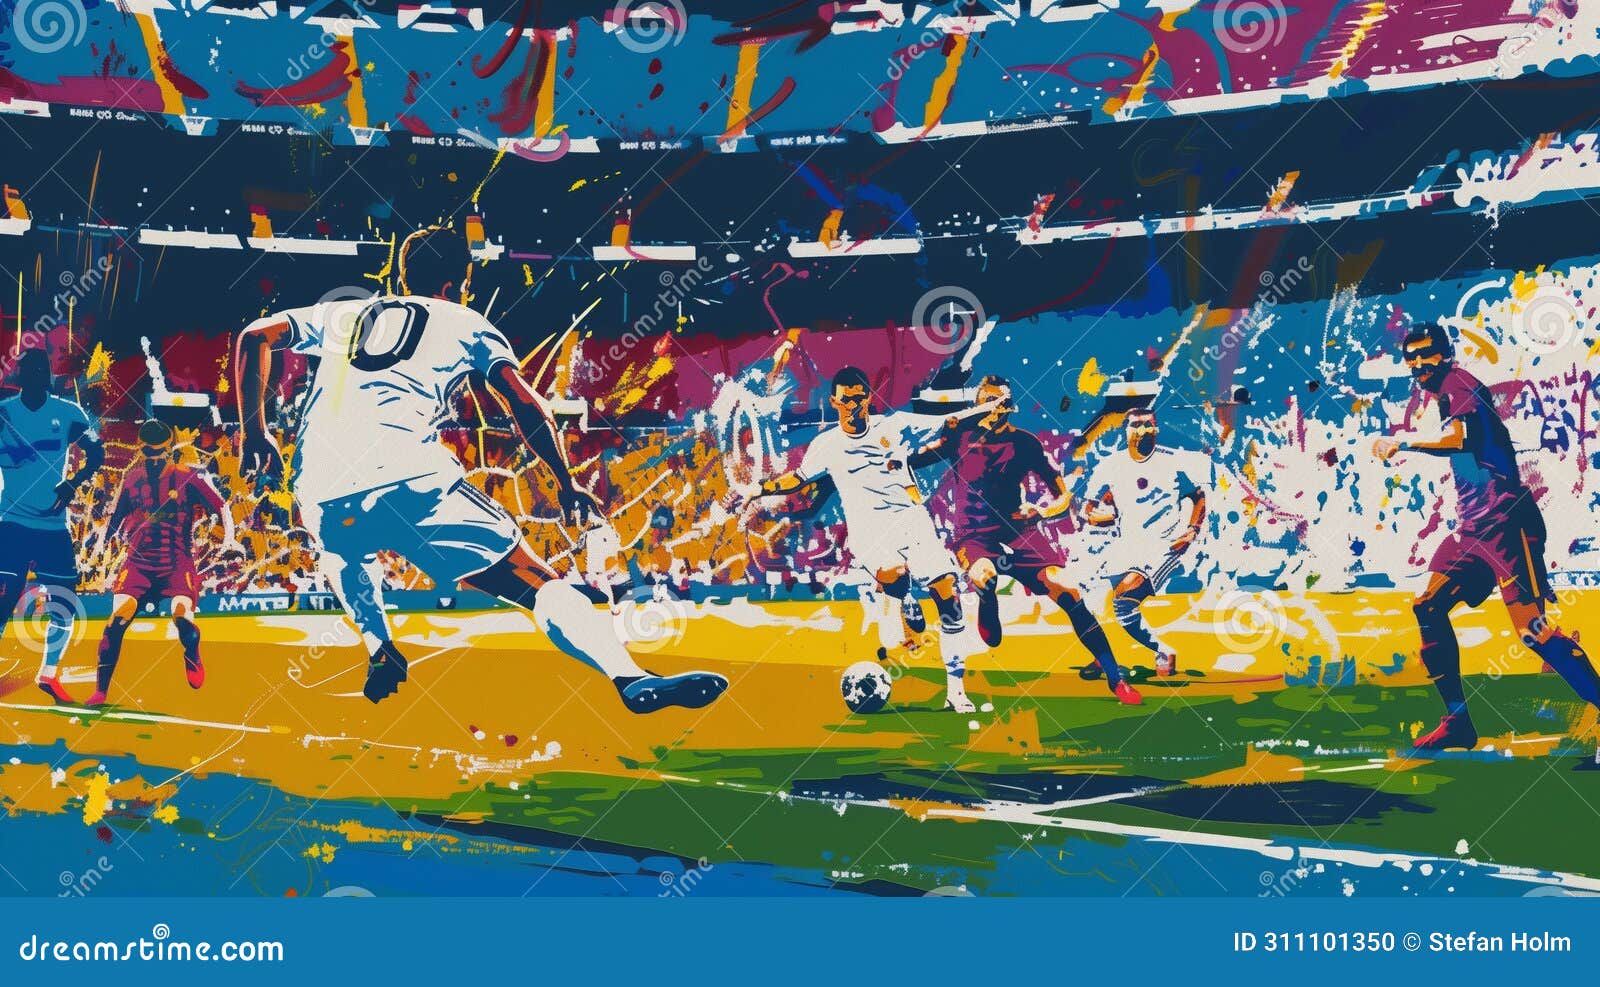 painting of the football game el clasico, colorful, bursting with the colors of both teams, white and gold, blue and maroon.